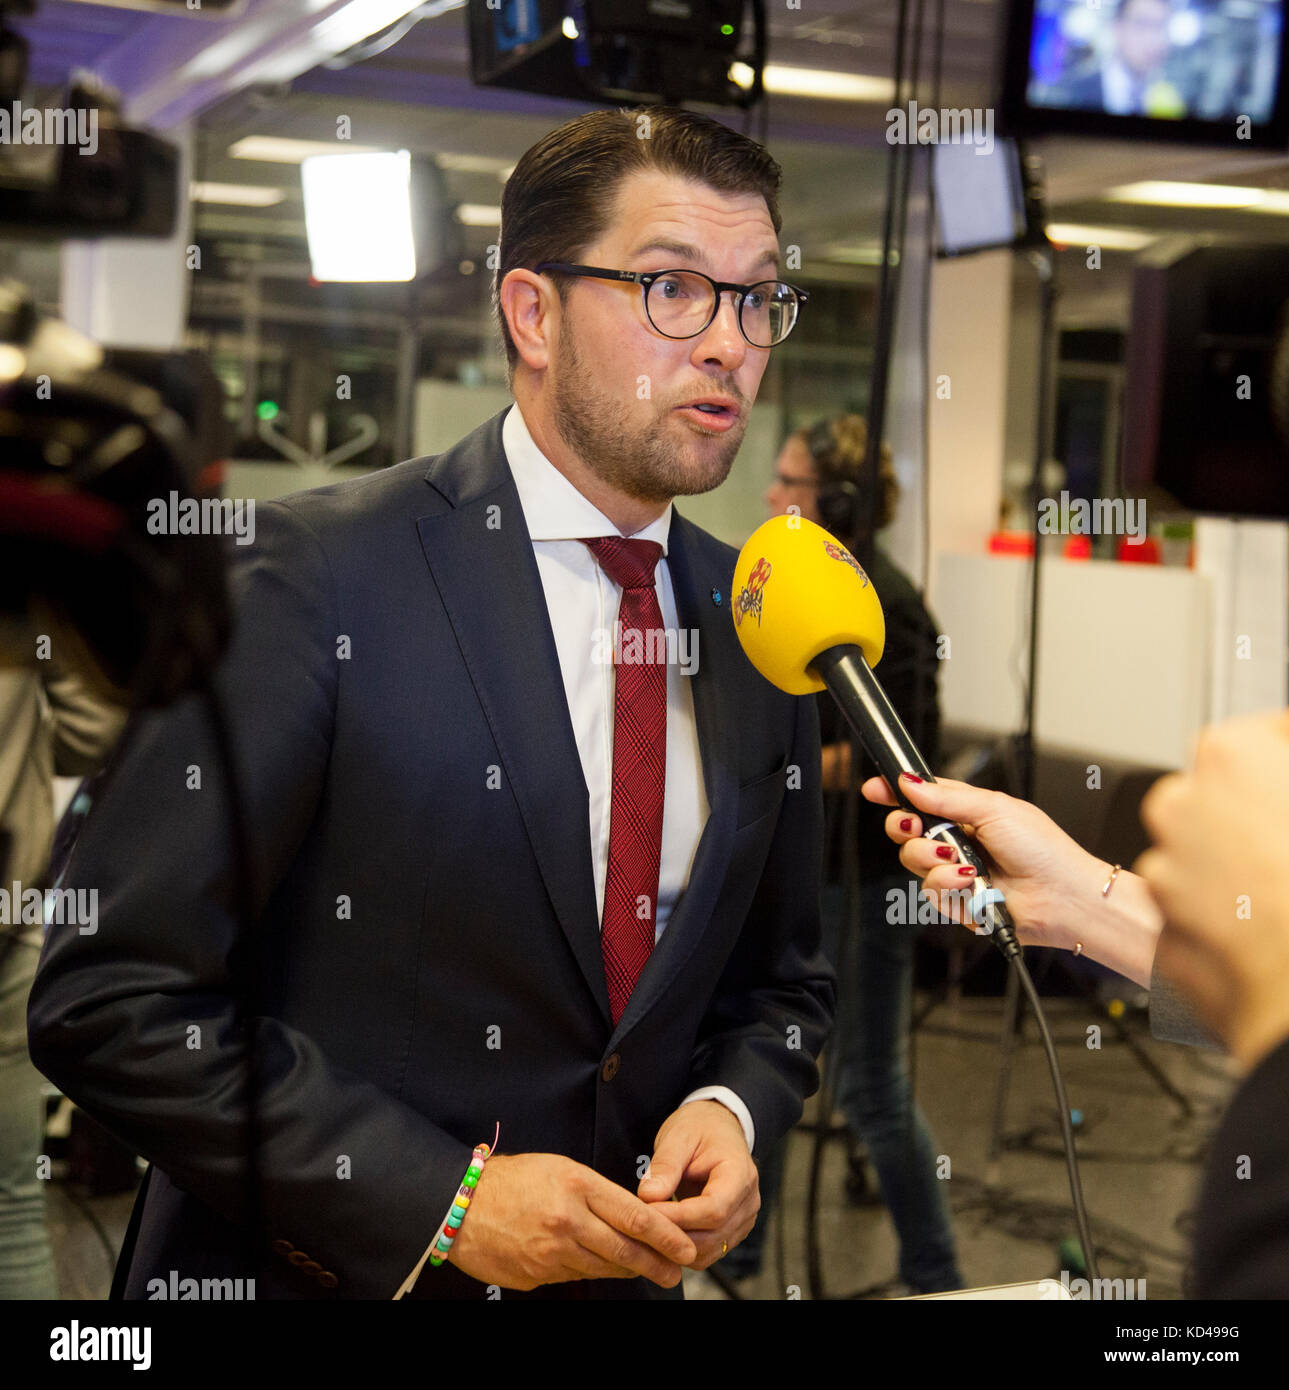 The Swedish election year 2018 began with a party leadership debate in Swedish television.The Swedish Democrats Jimmie Åkesson face the Press Stock Photo